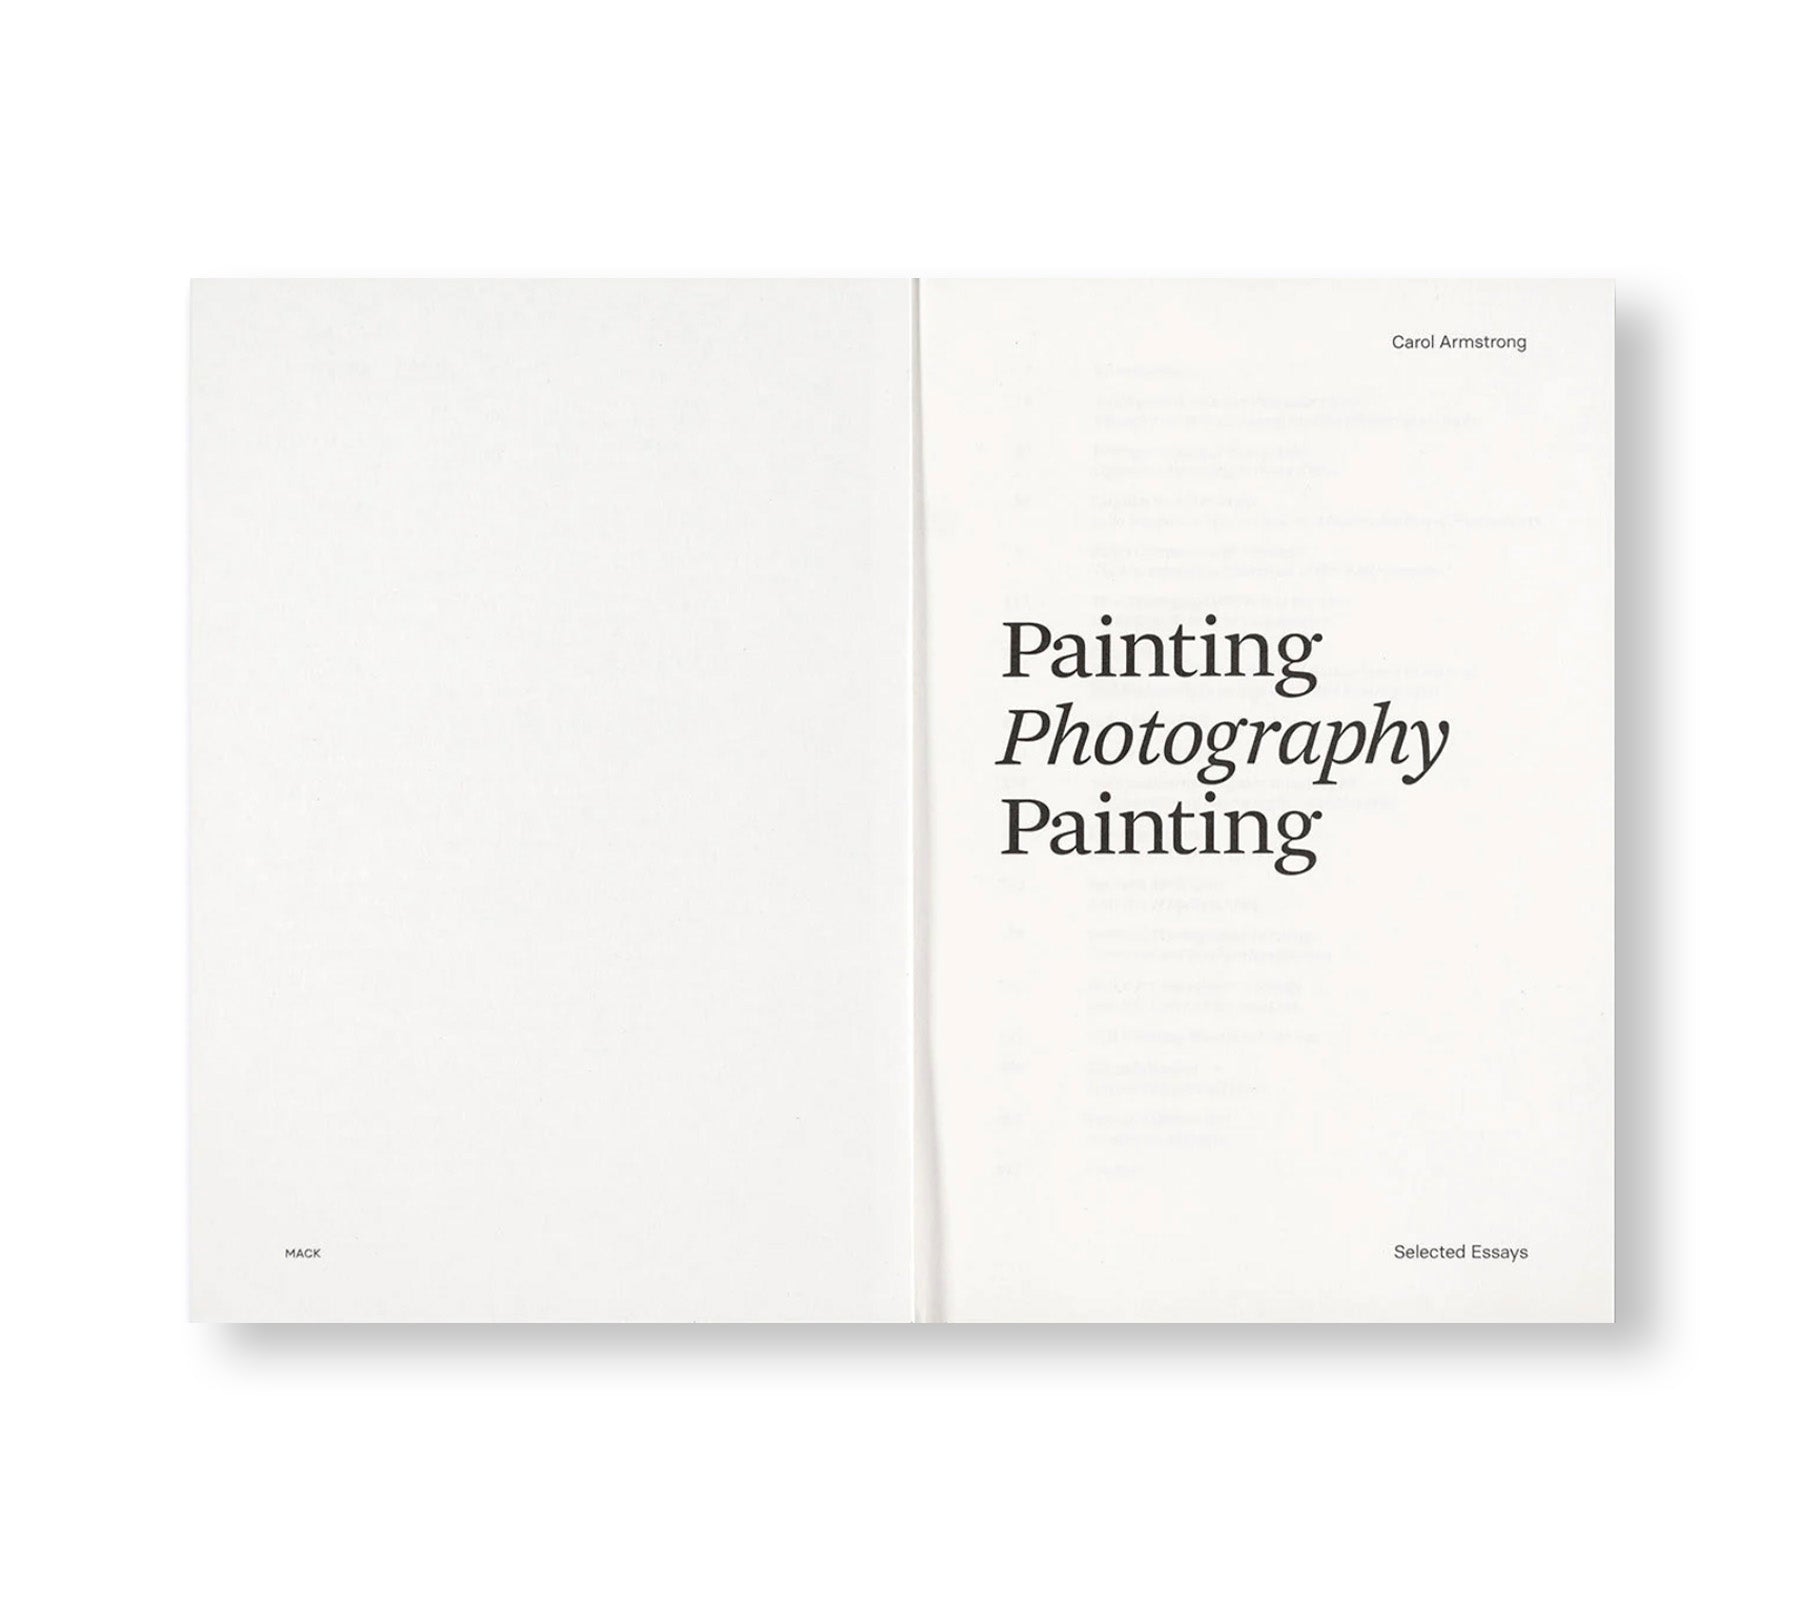 PAINTING PHOTOGRAPHY PAINTING: SELECTED ESSAYS by Carol Armstrong